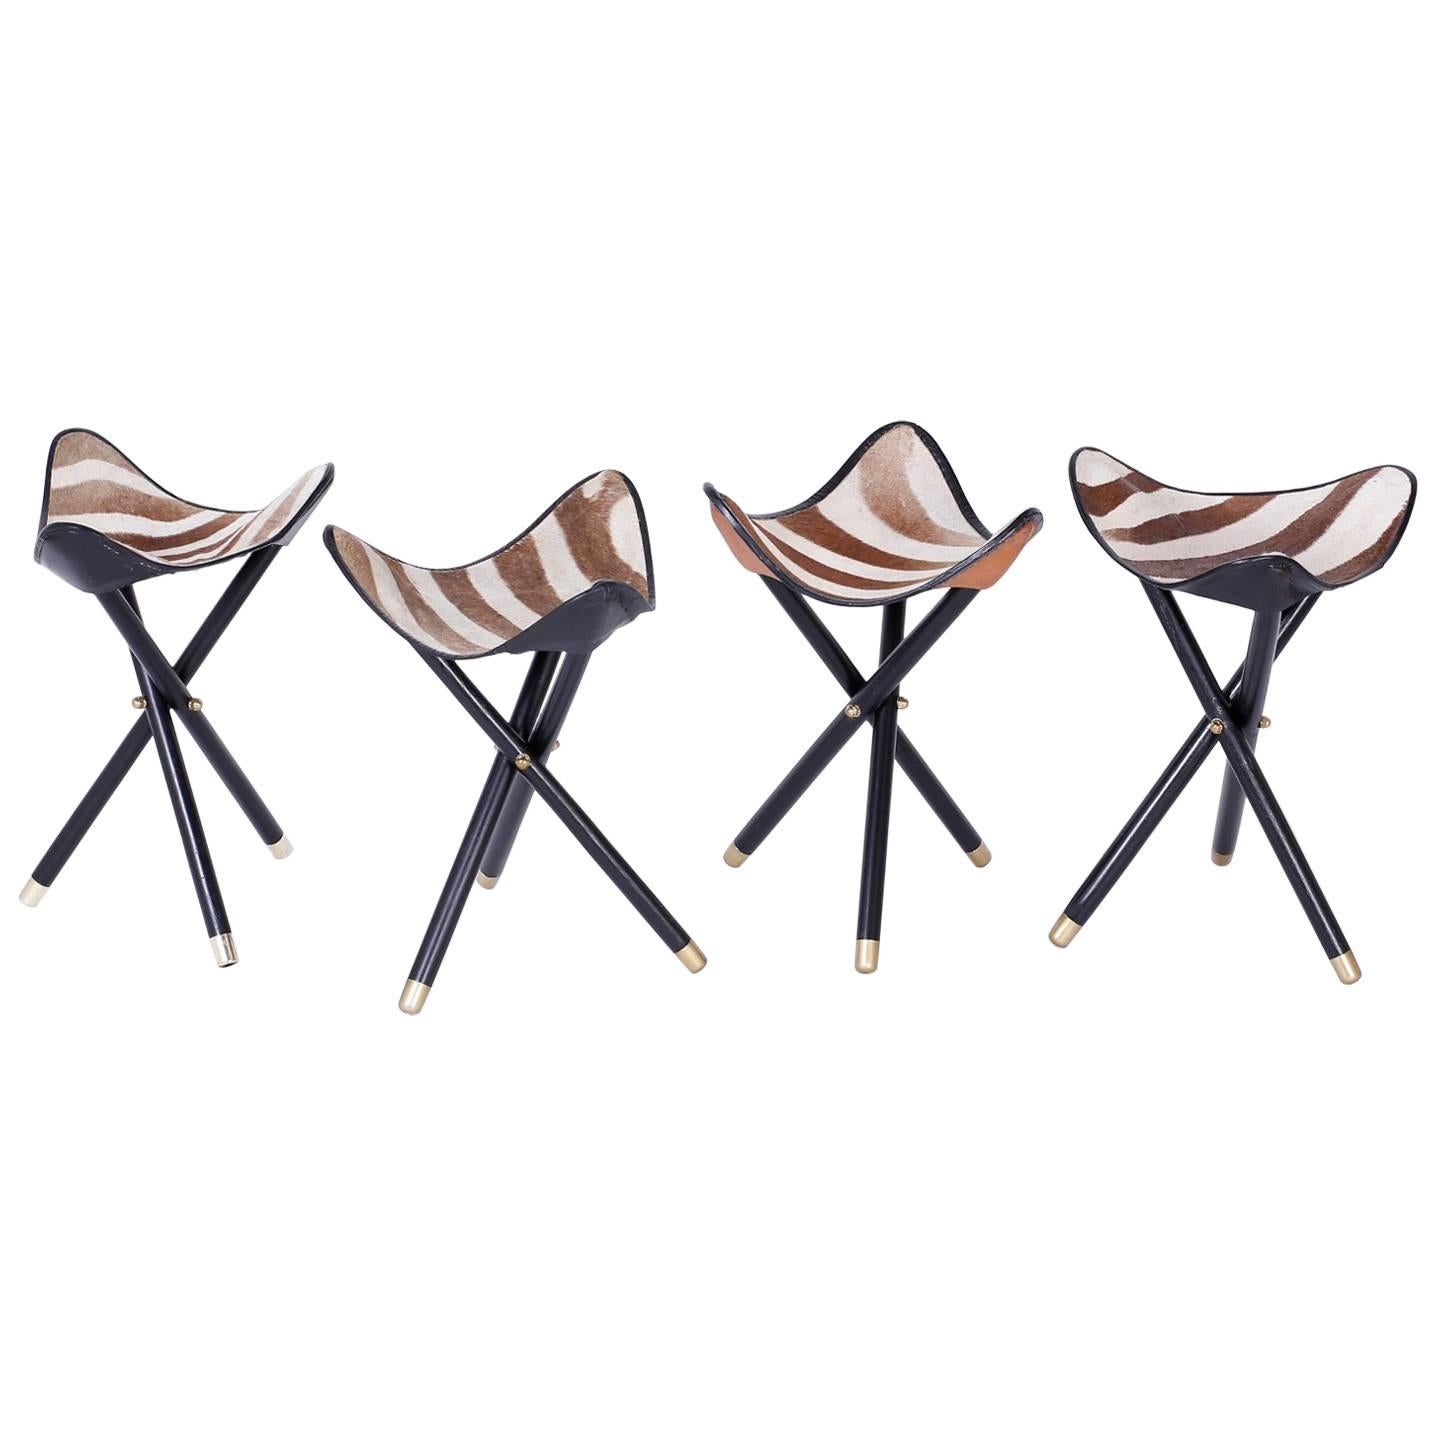 Group of Four Campaign Style Zebra Hide Folding Stools, Available Individually